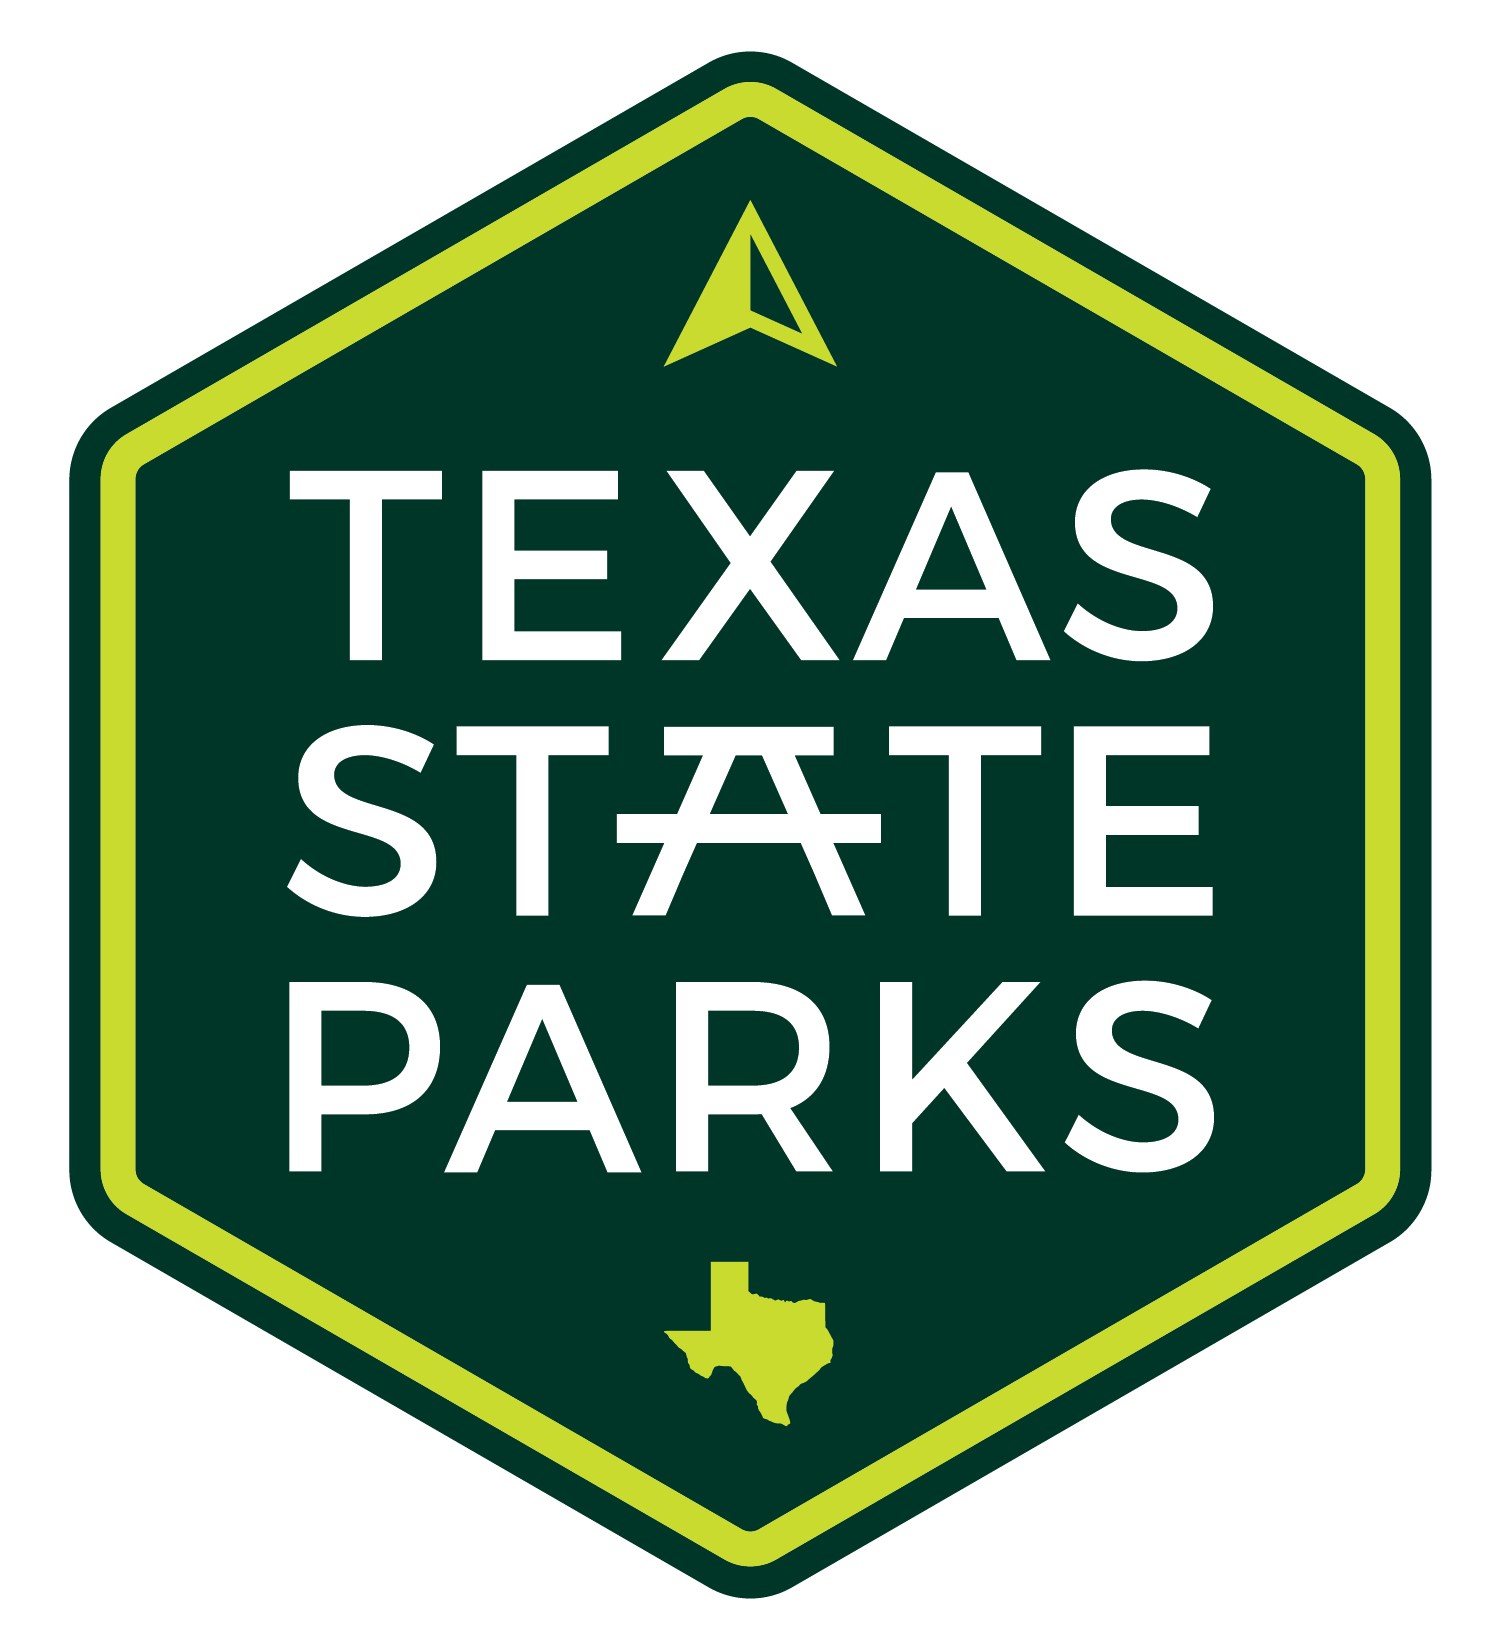 Texas state parks